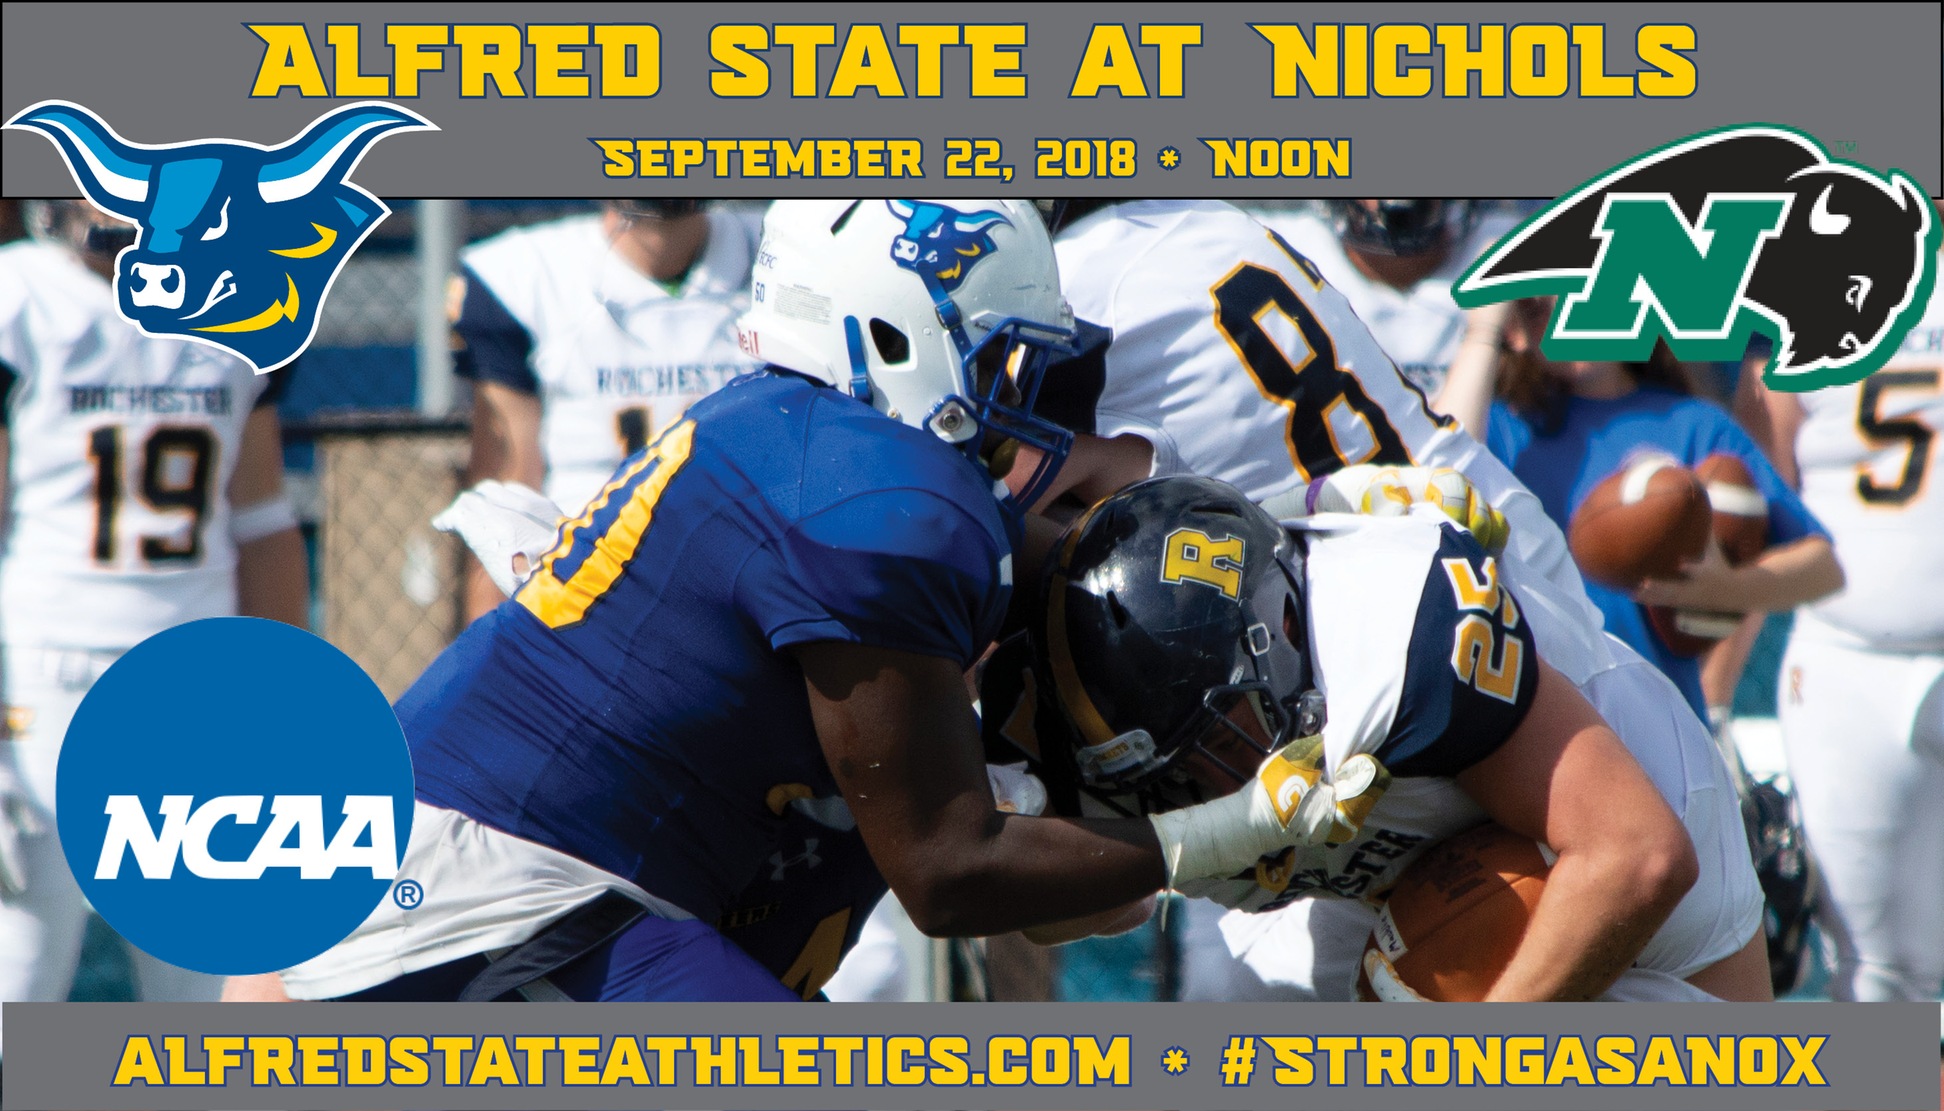 Alfred State travels to Nichols to take on the Bison in their final non-conference contest.